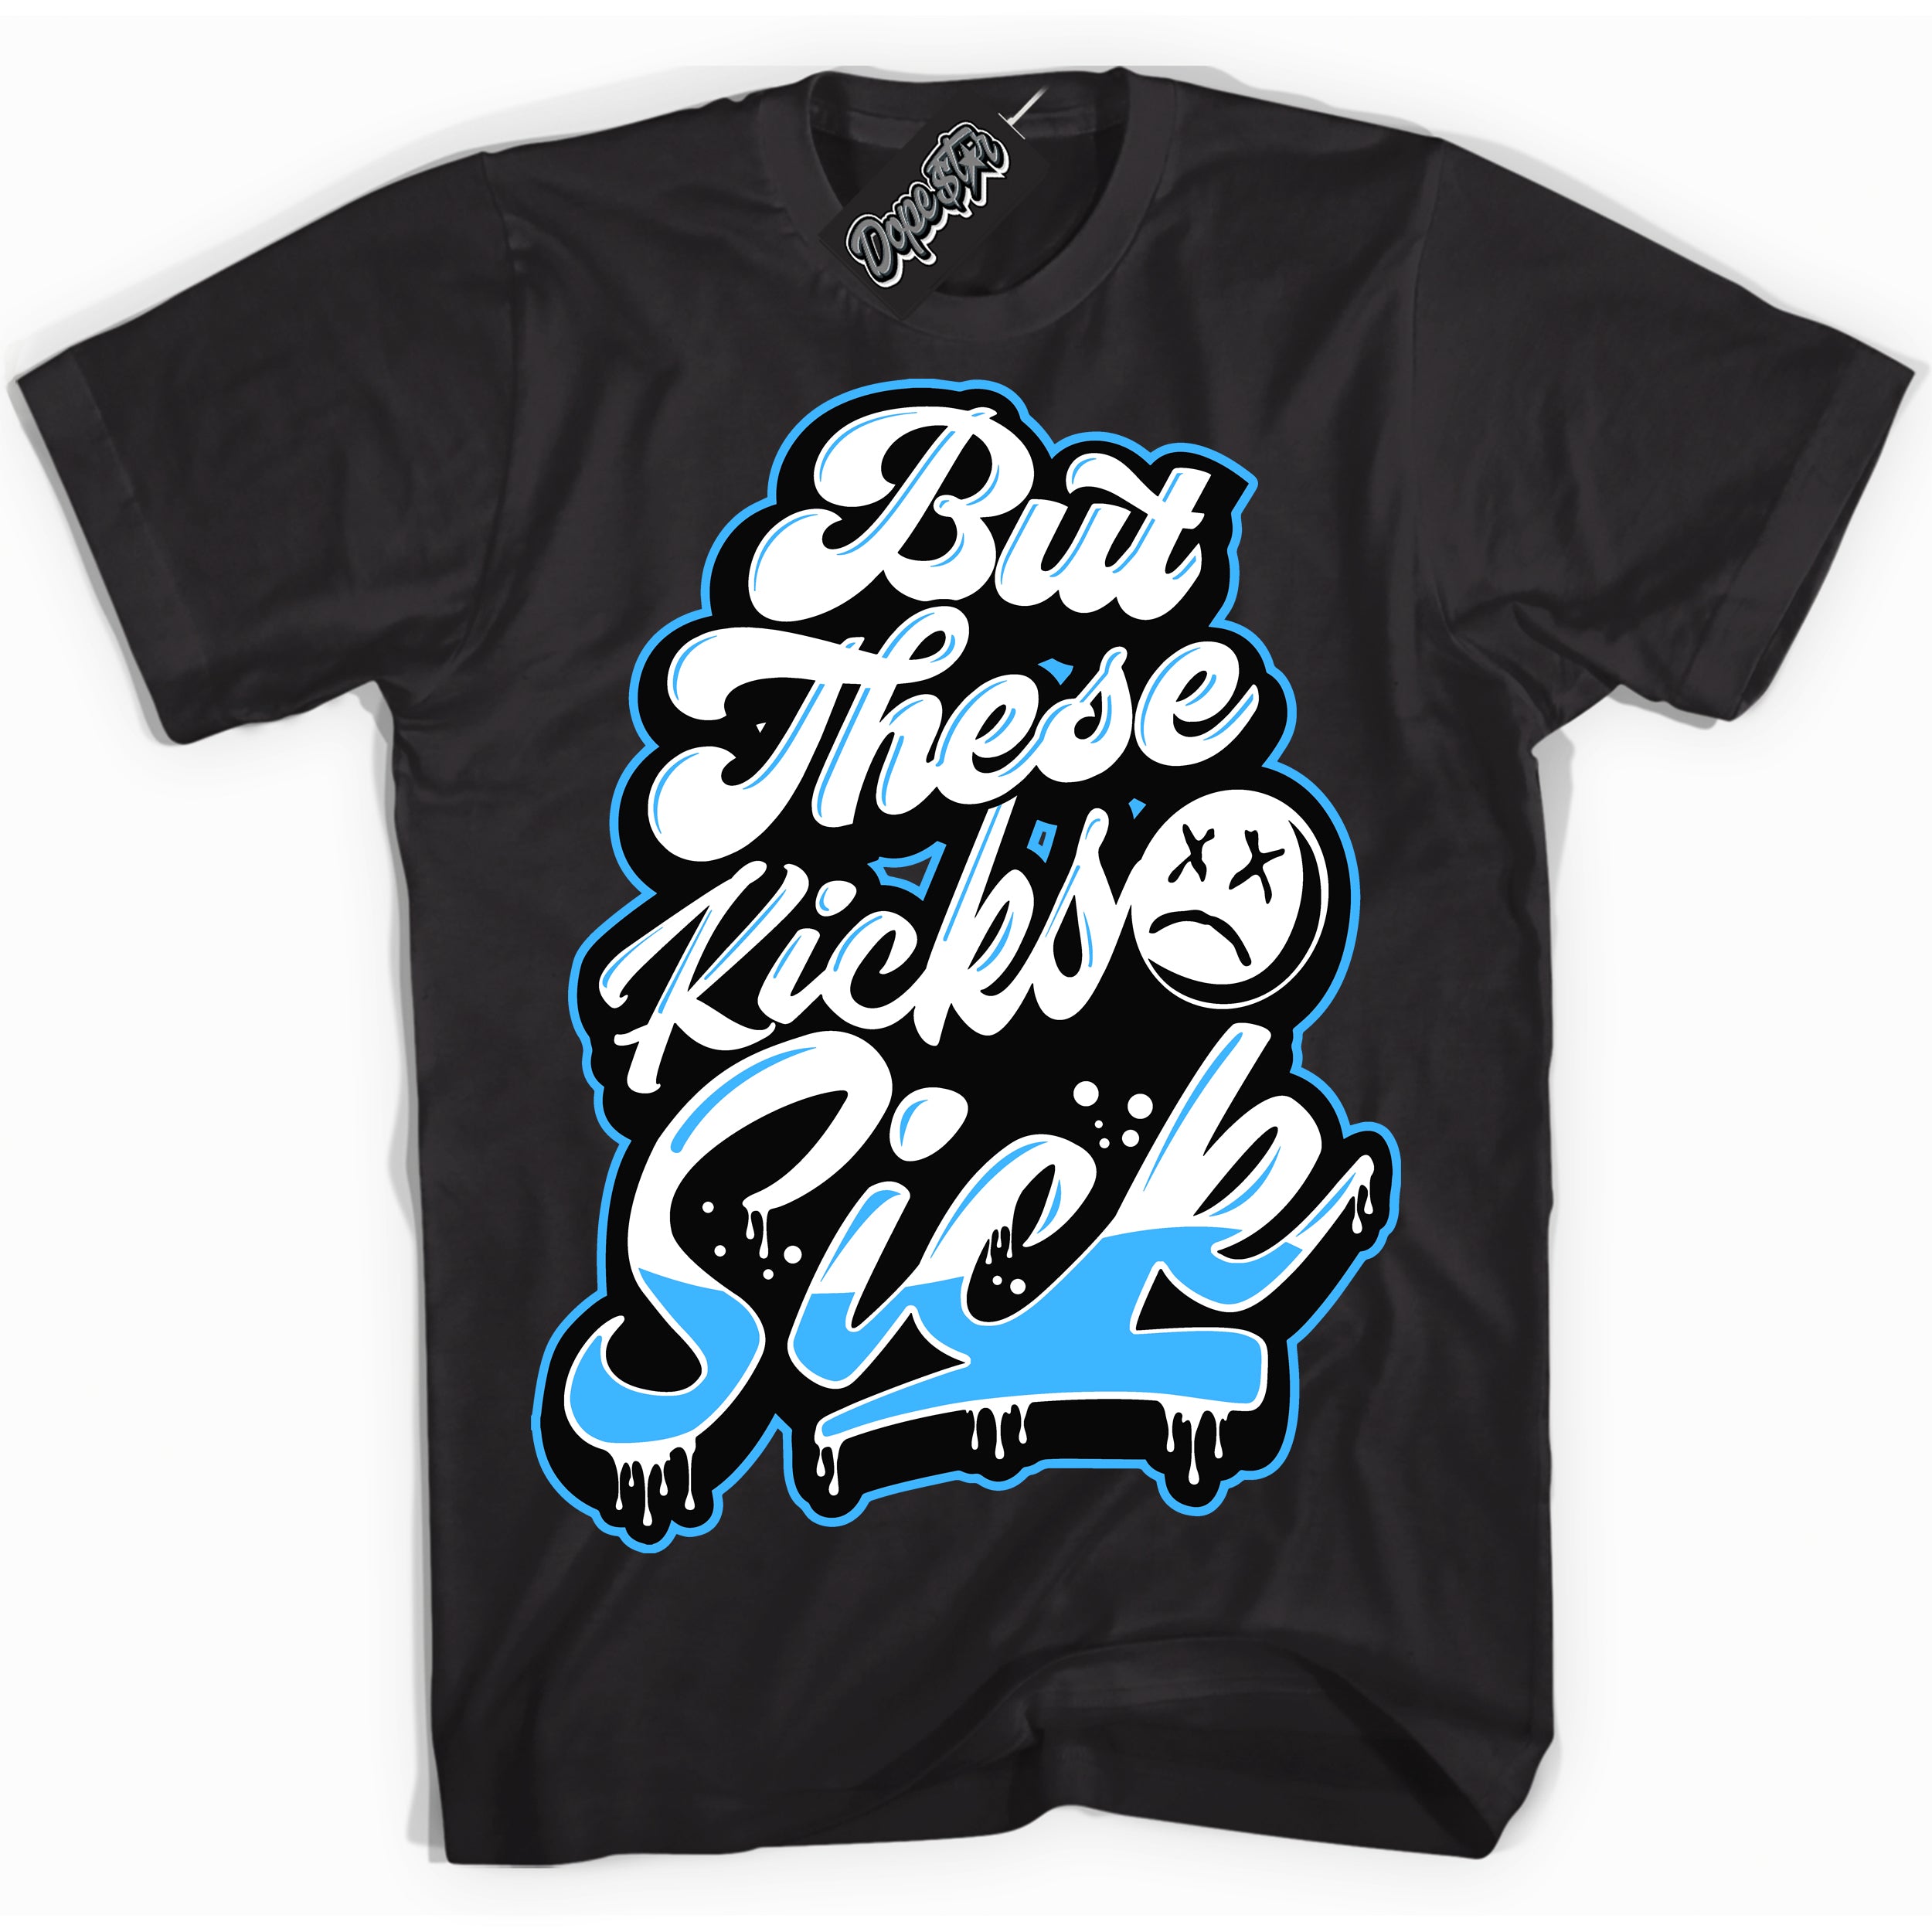 Cool Black graphic tee with “ Kick Sick ” design, that perfectly matches Powder Blue 9s sneakers 